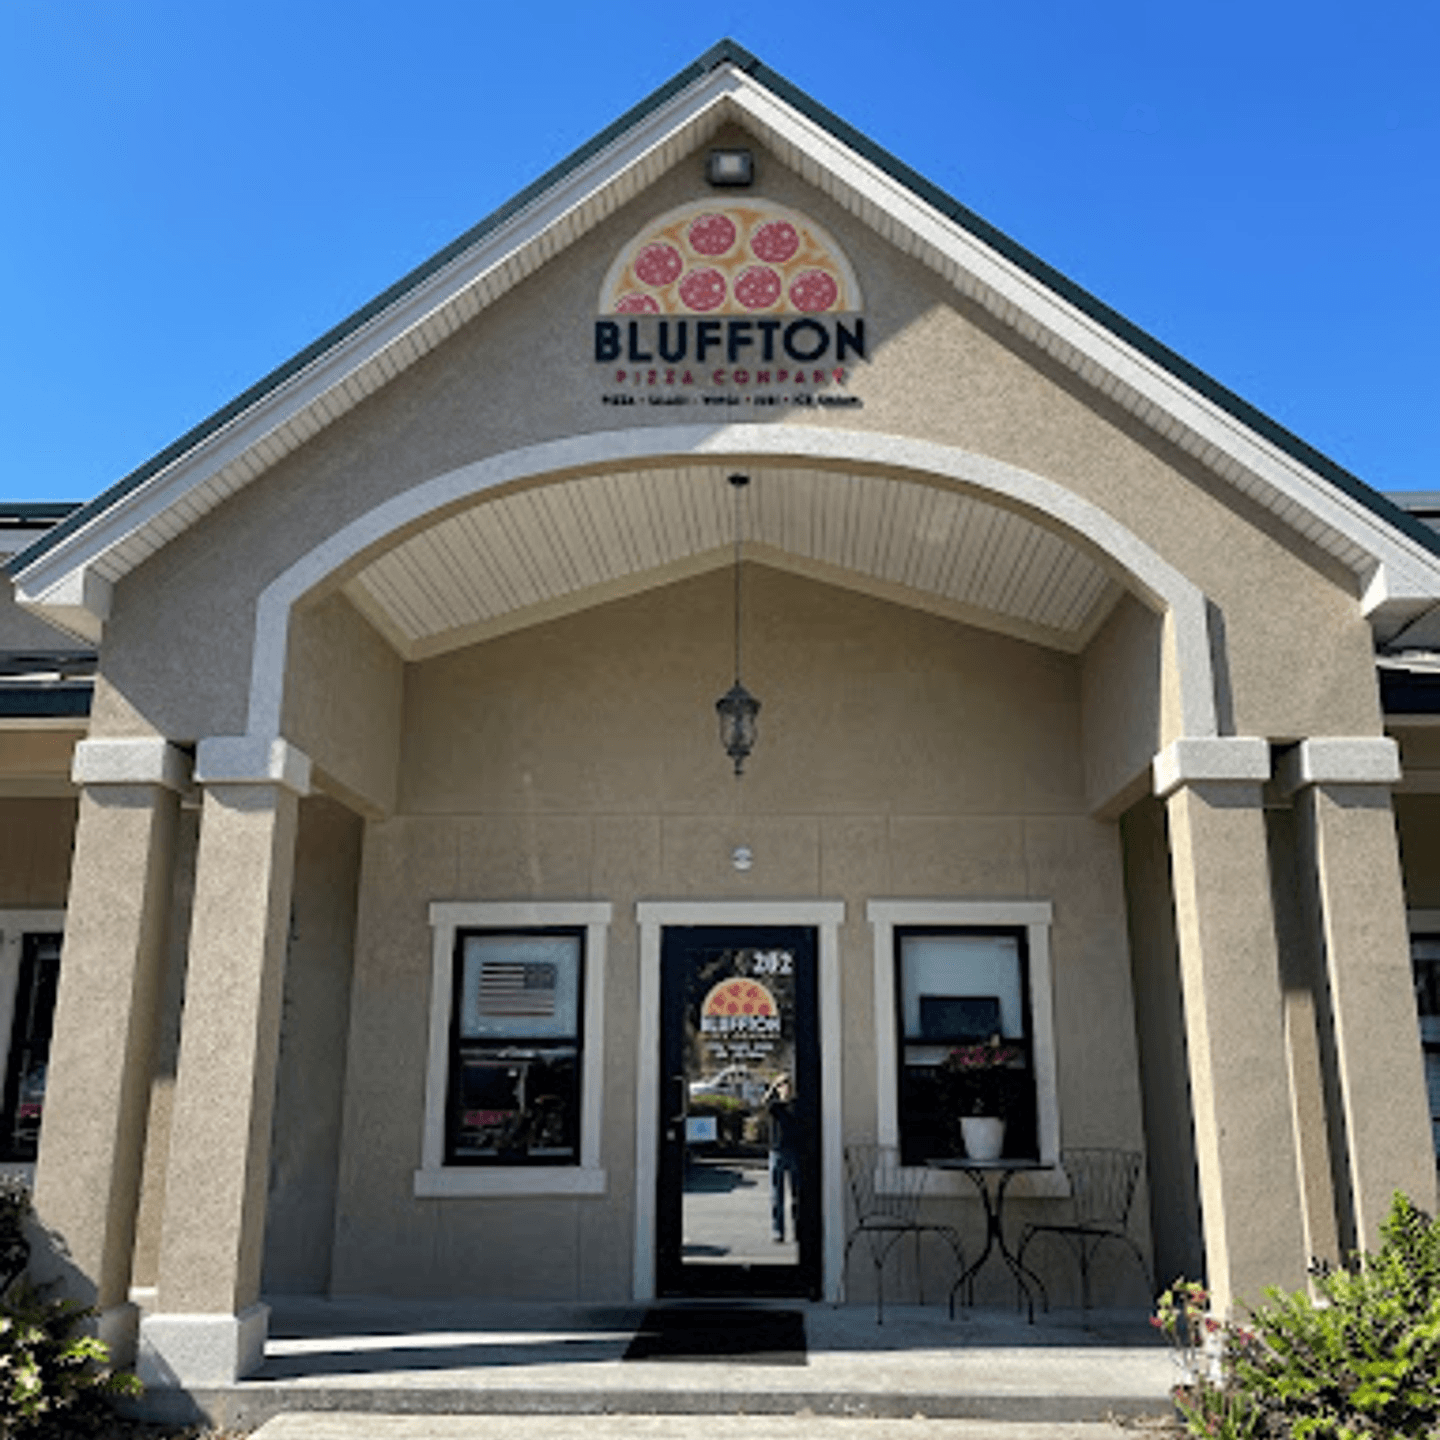 Welcome to Bluffton Pizza Company!